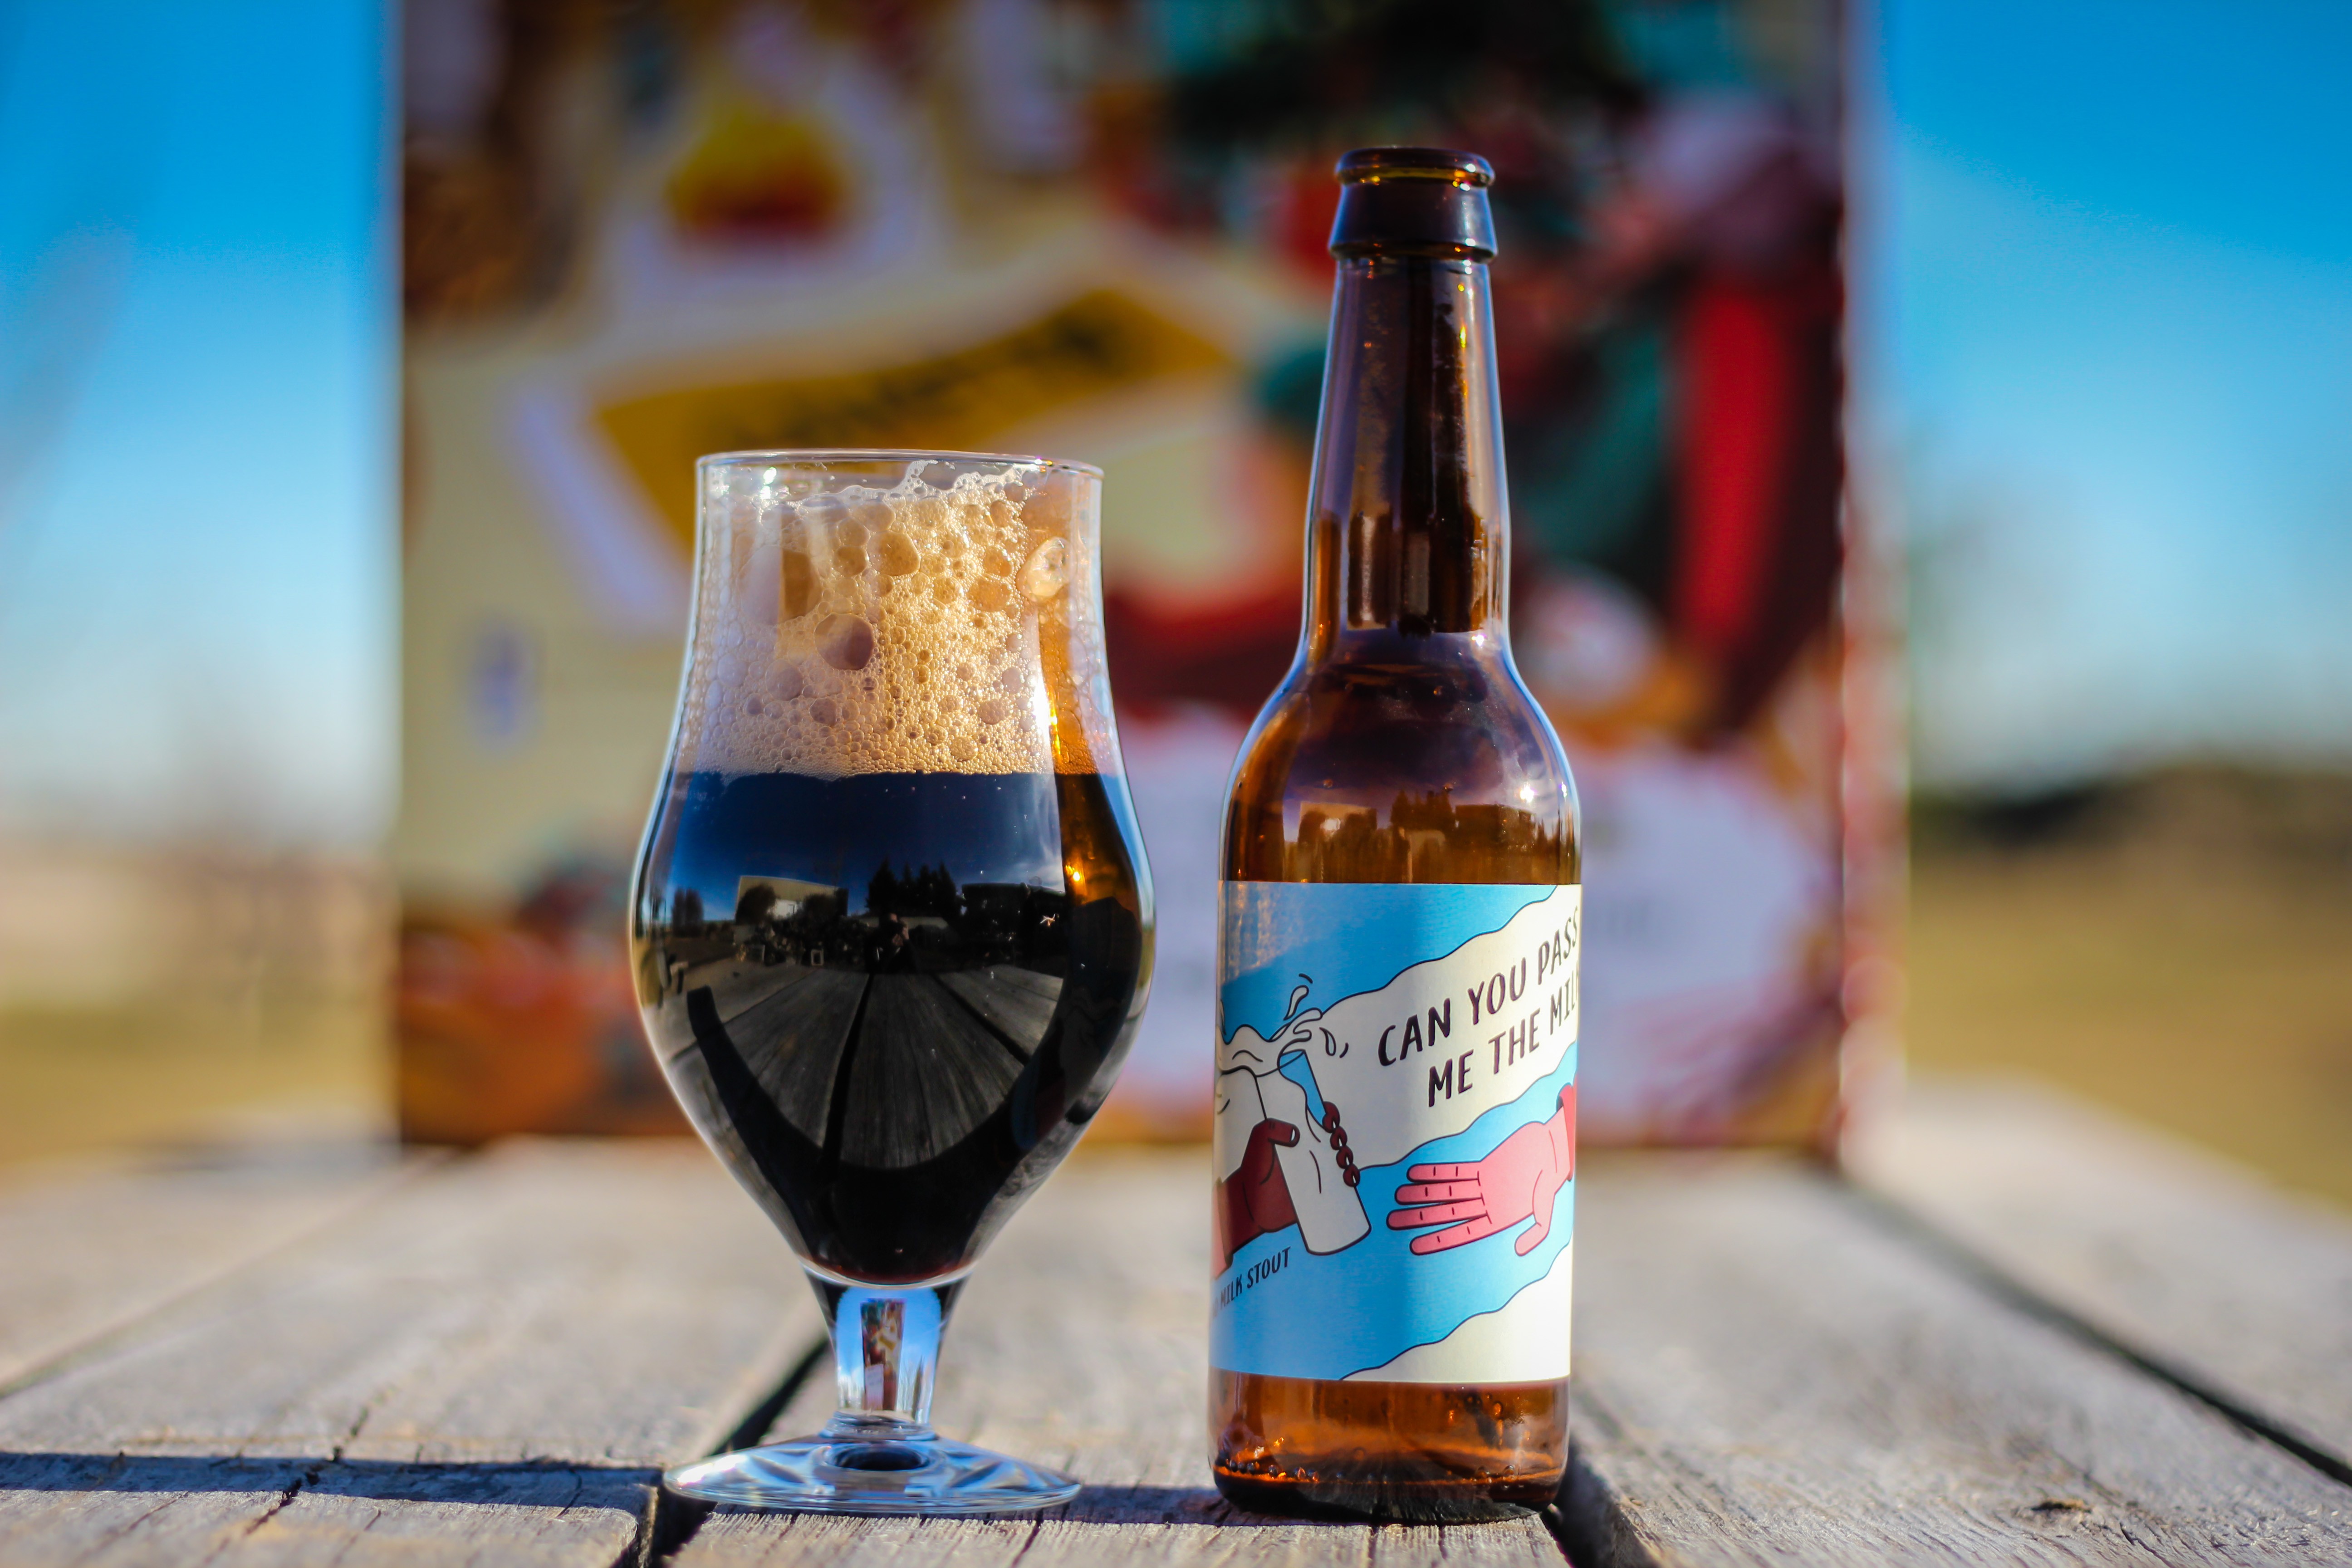 2018 Craft BeerAdvent Calendar: Frontaal Can You Pass Me The Milk?